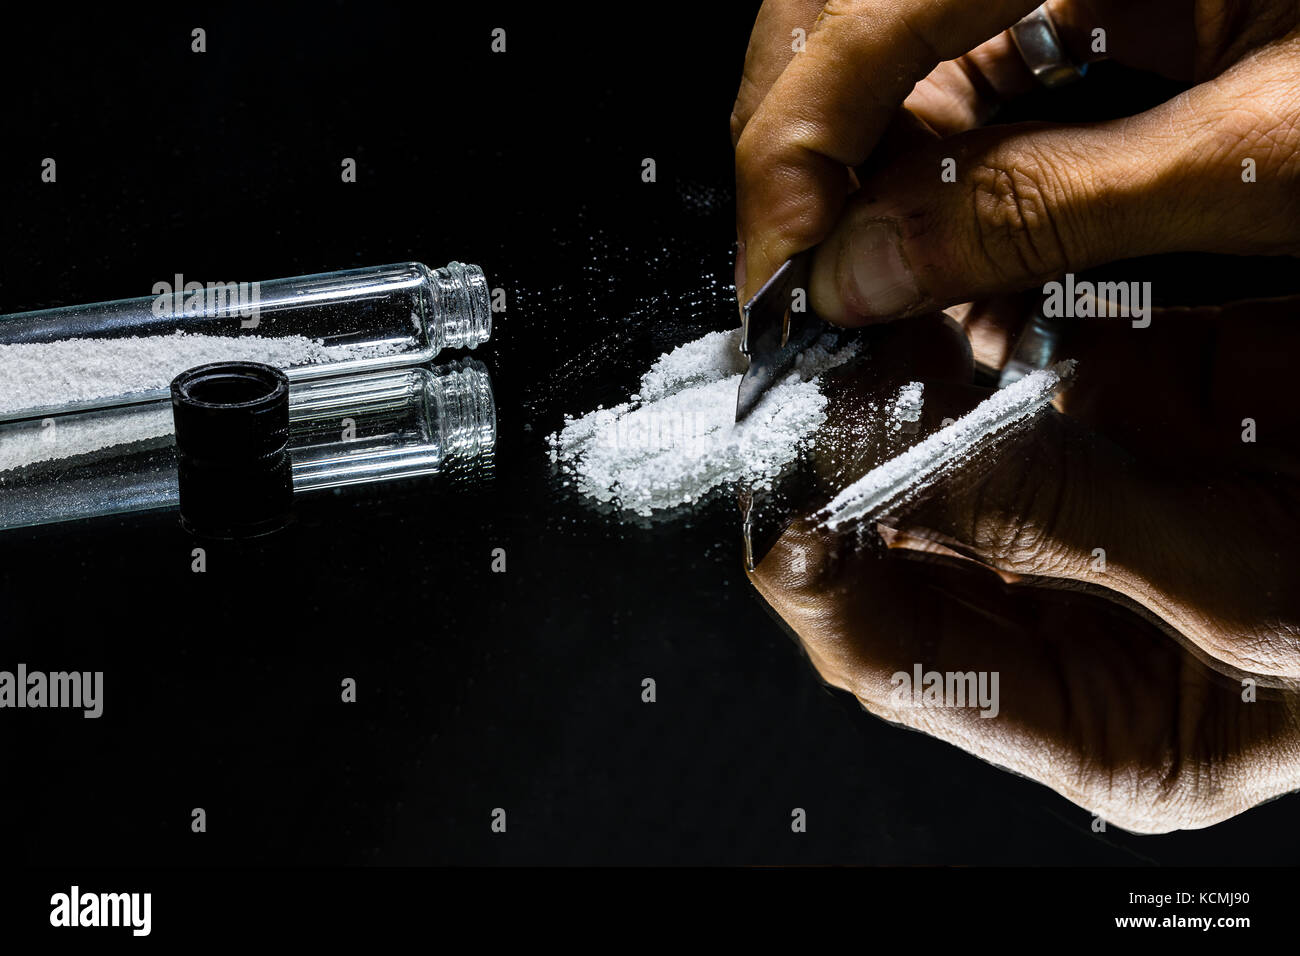 America`s drug epidemic has been brought heavily to light in recent years  and Cocaine ranks high among drugs used by many socioeconomic groups. Stock Photo